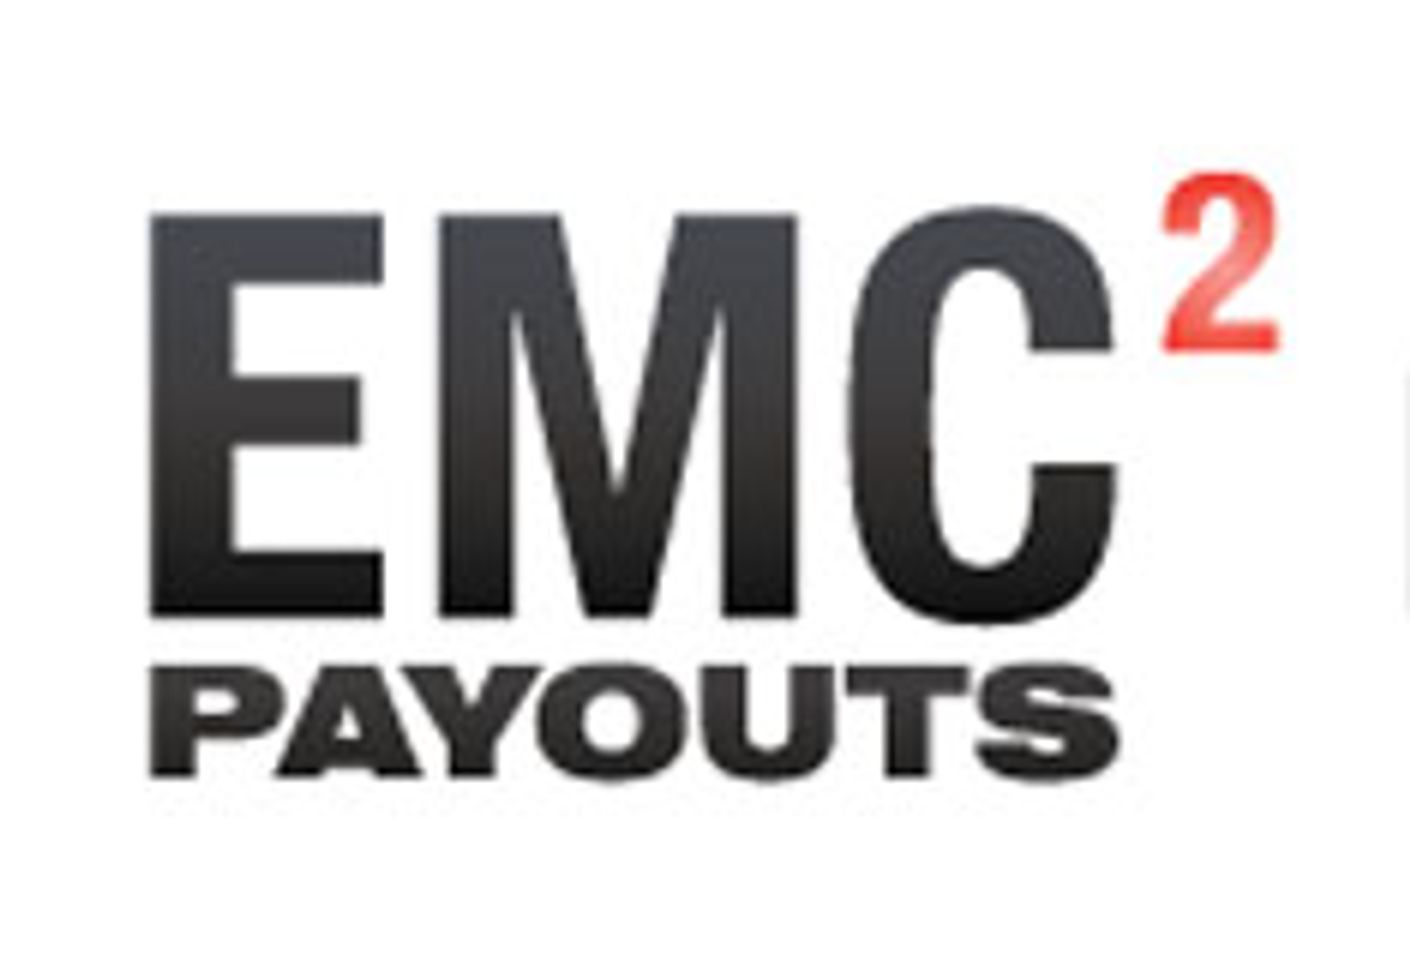 EMC2Payouts Delivers Exciting Improvements for Global Payments